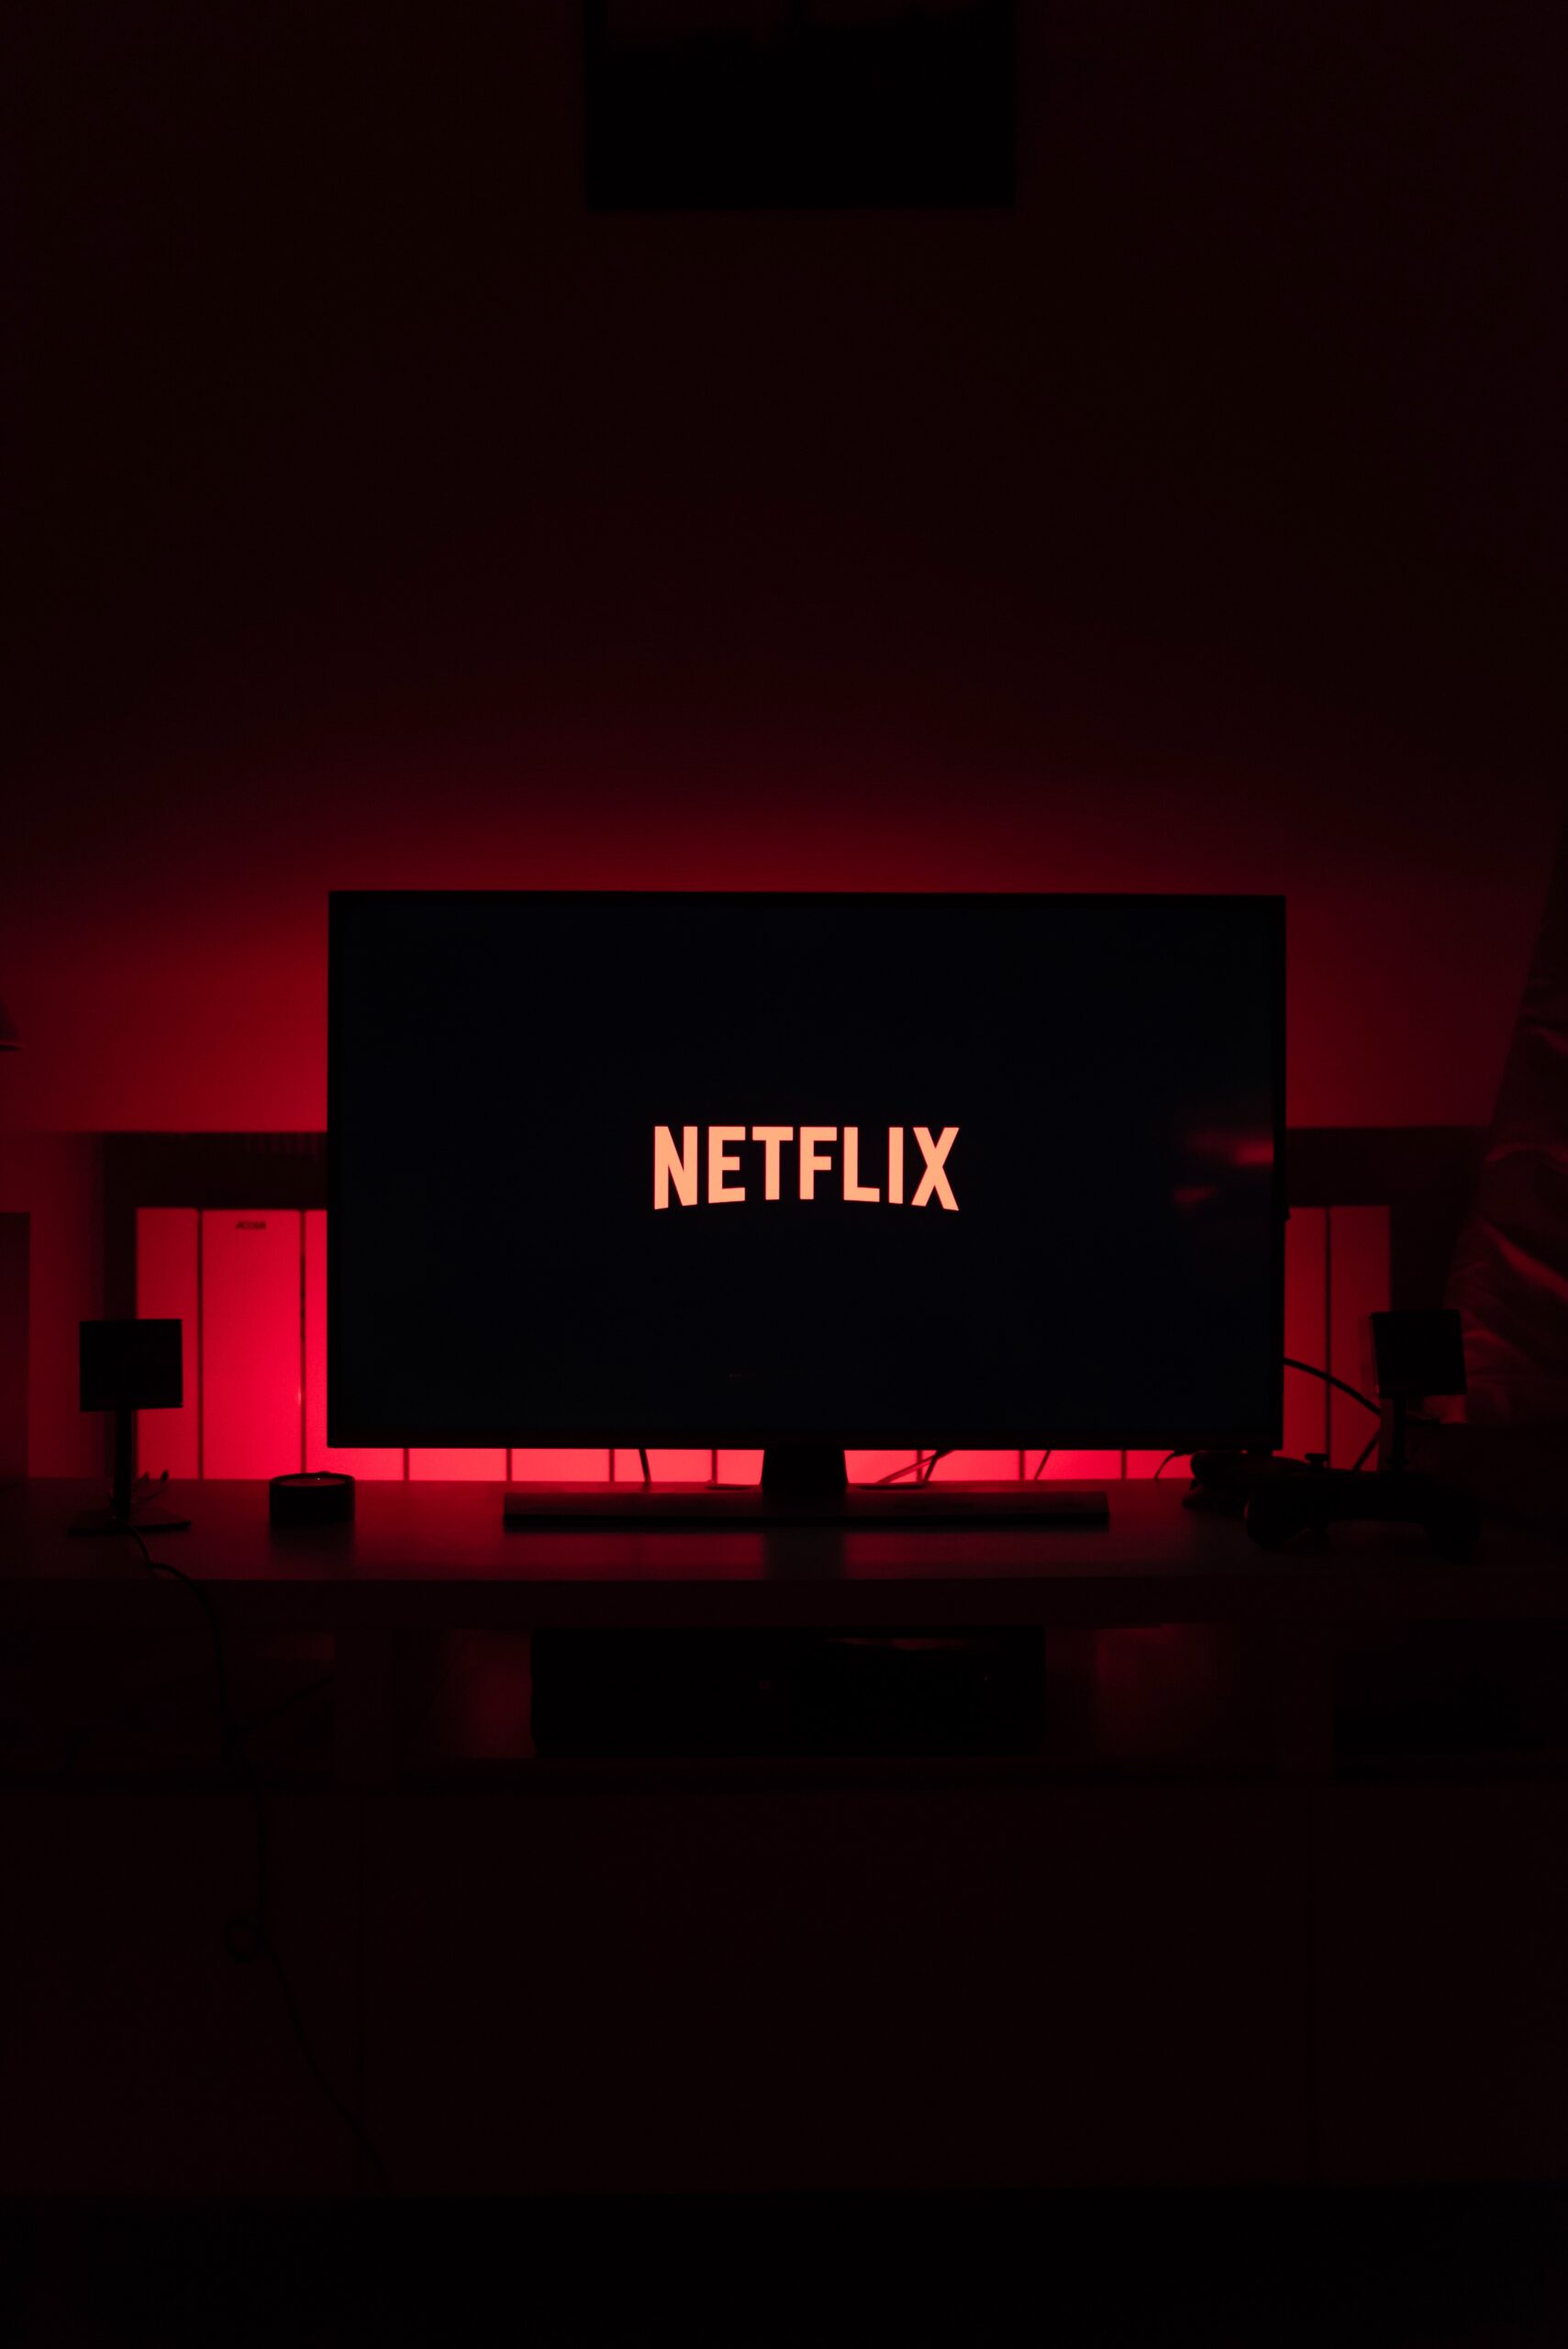 Are Your Employees Watching Netflix at Work?